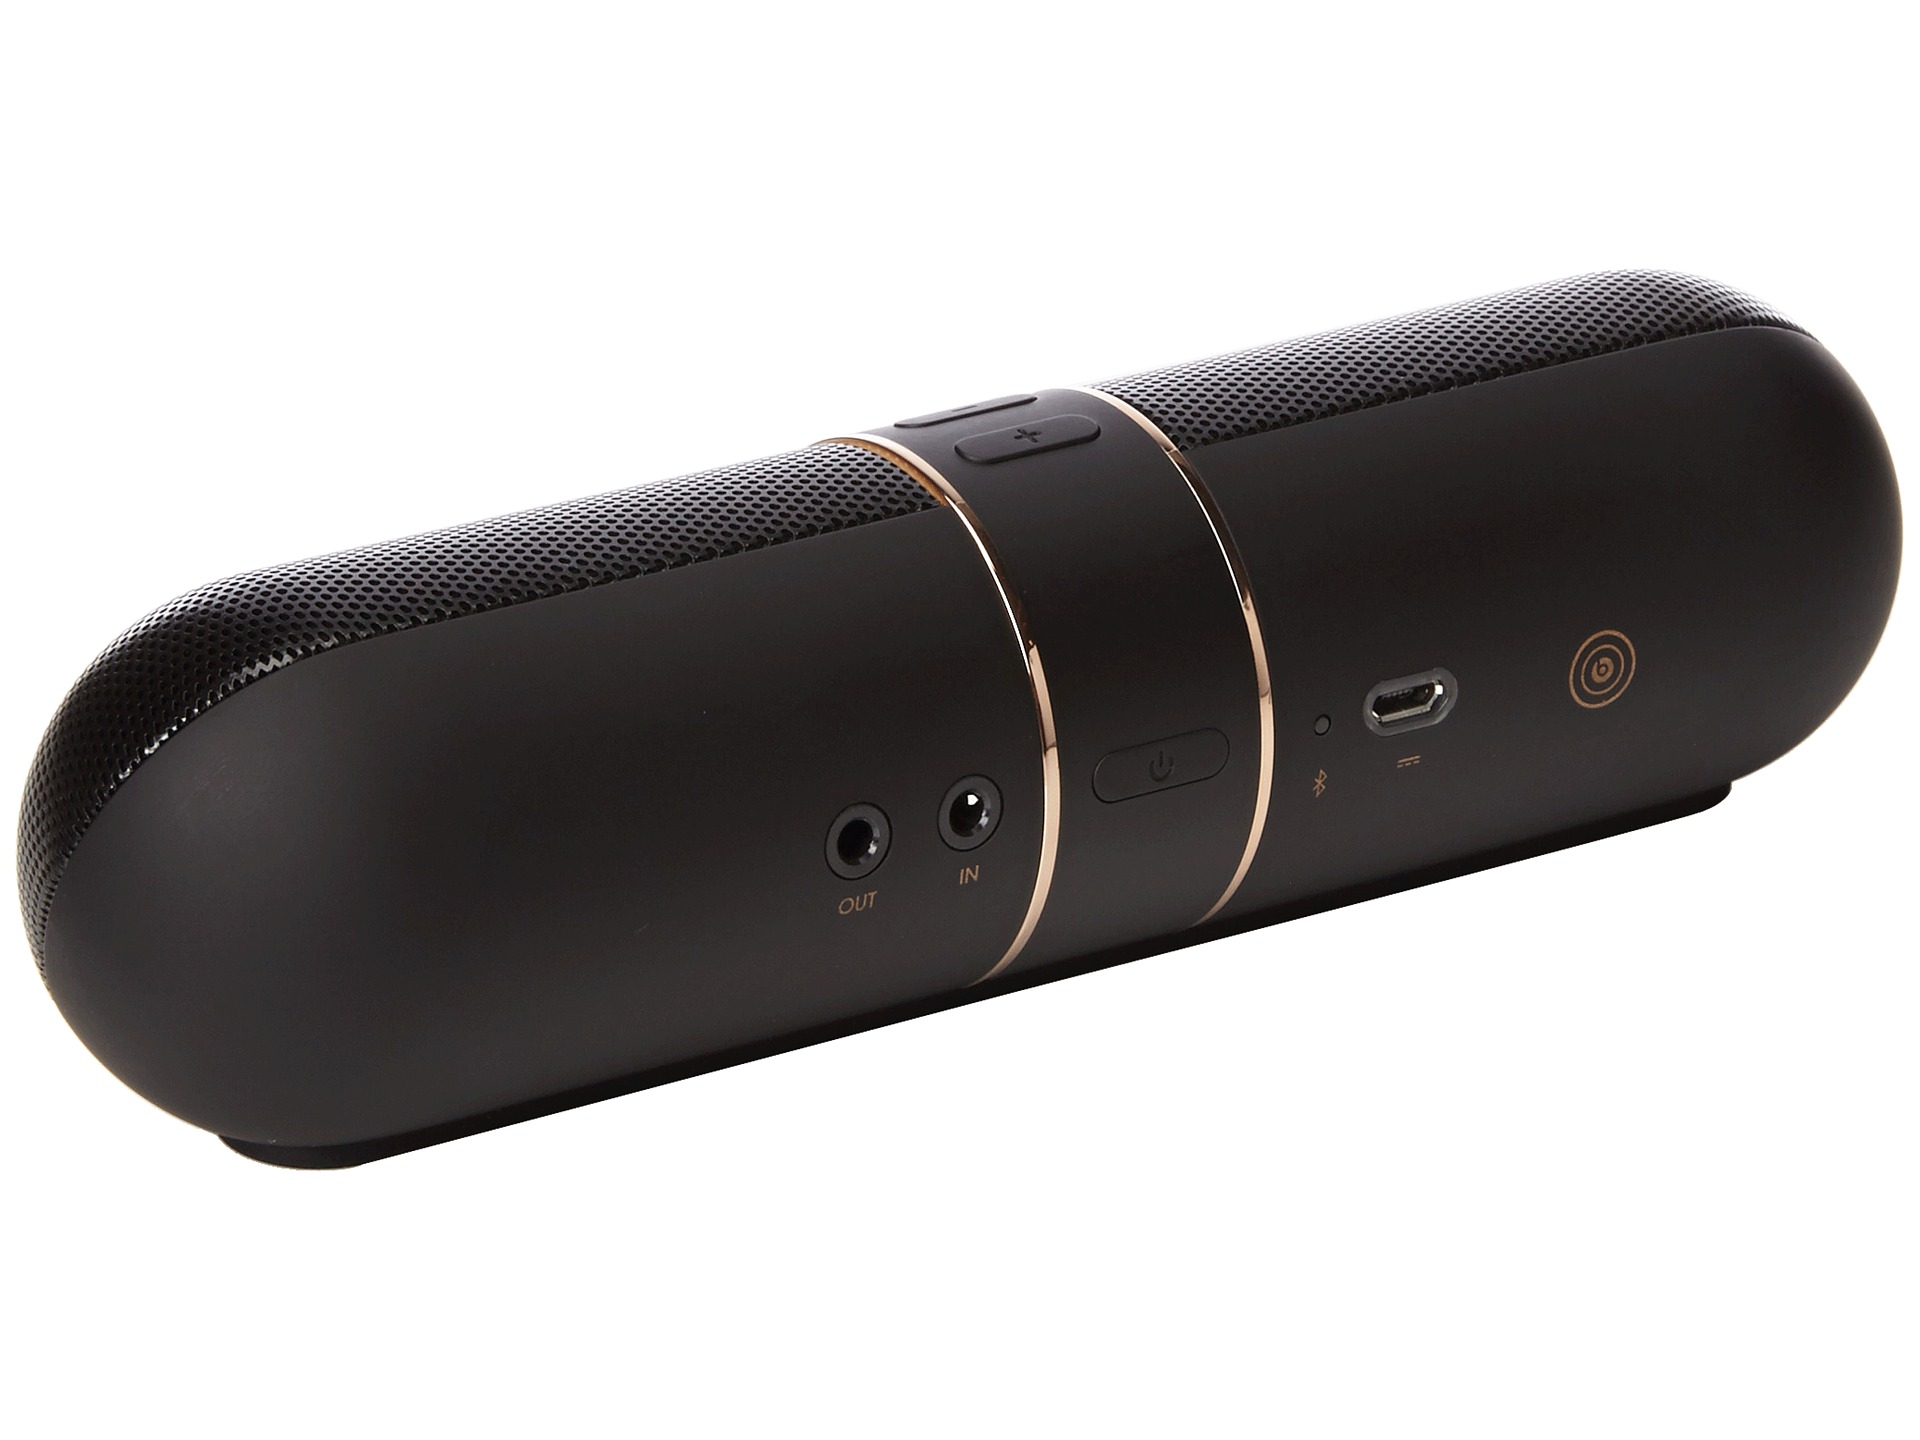 Beats By Dre Pill Speaker, Accessories | Shipped Free at Zappos